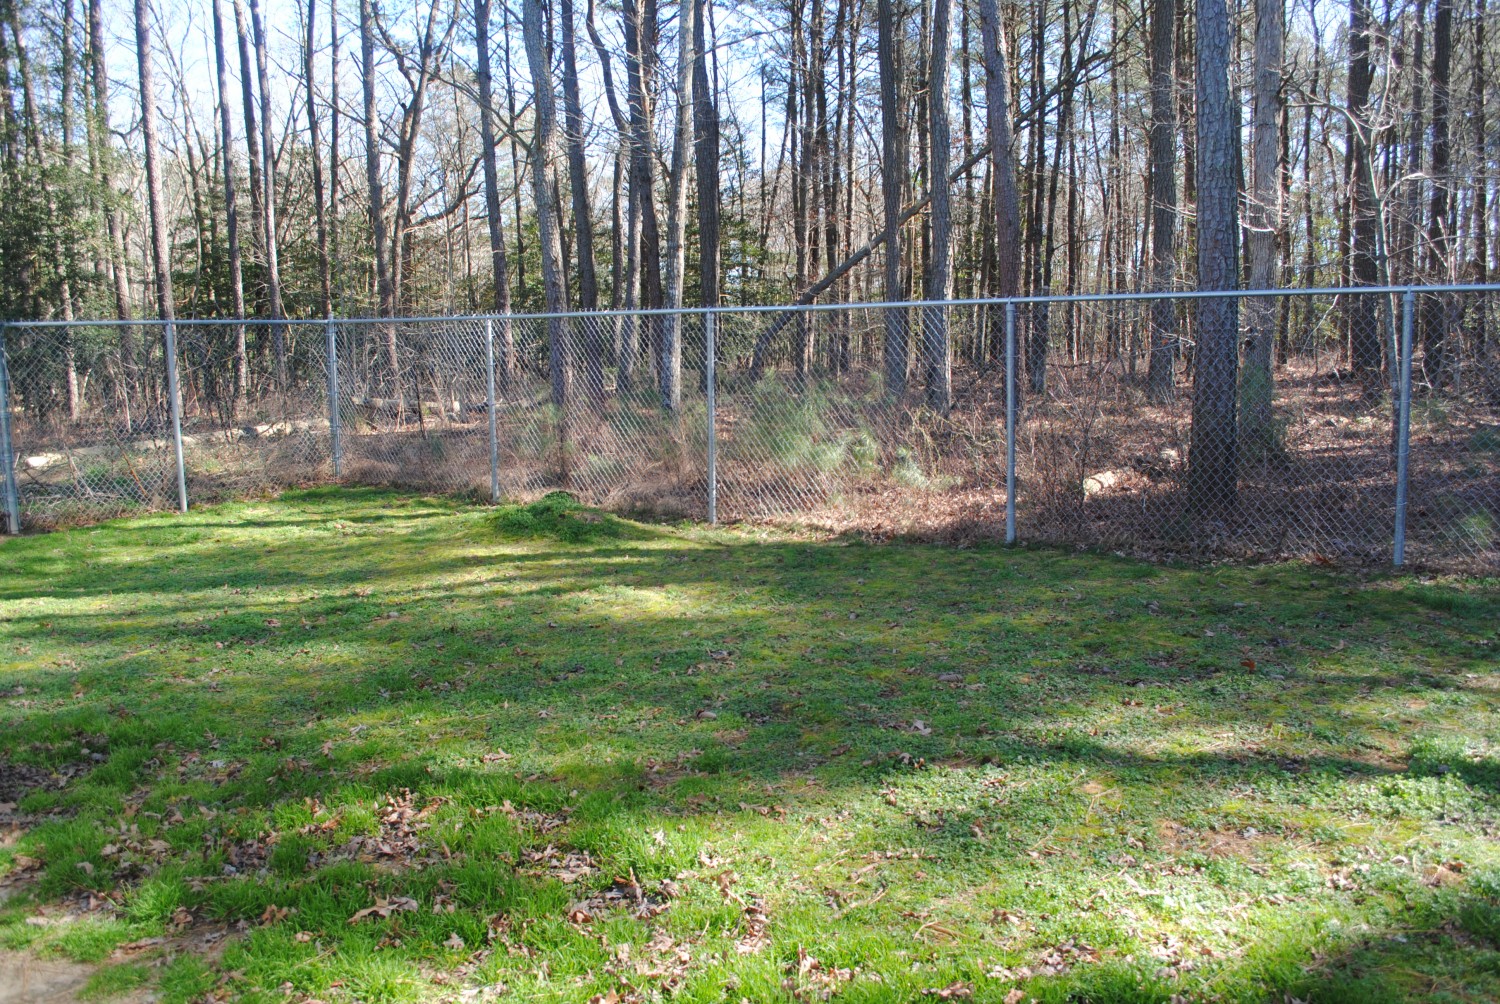 For our canine guests, we have two fenced in yards where they can enjoy the sunshine!